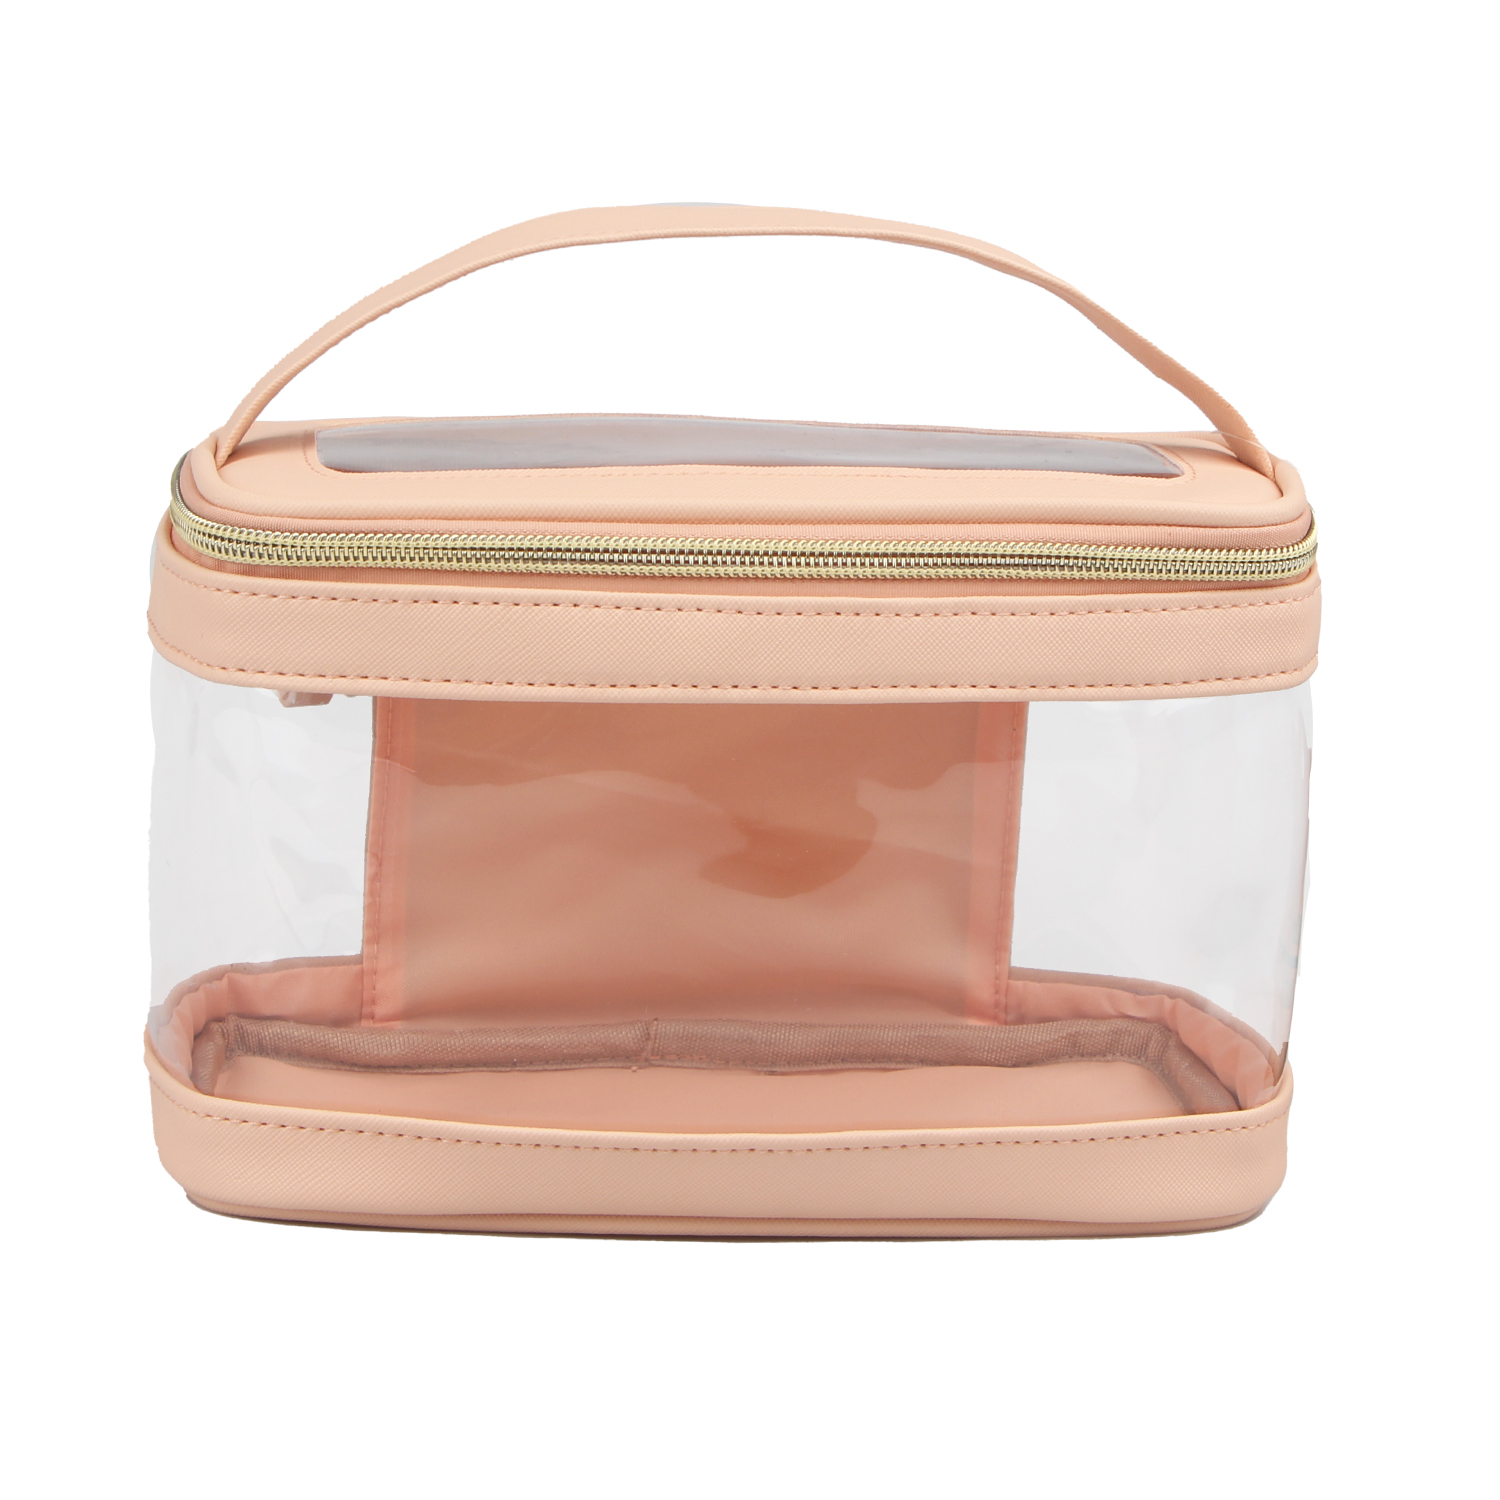 Pink PVC+PVC leather Zipper Bag . Clear Makeup Bag, Clear Toiletry Bags for Traveling, Toiletry Bag for Women, Clear Travel Bags For Toiletries, Travel Cosmetic Bags Organizer (Off-White) . Accesso...